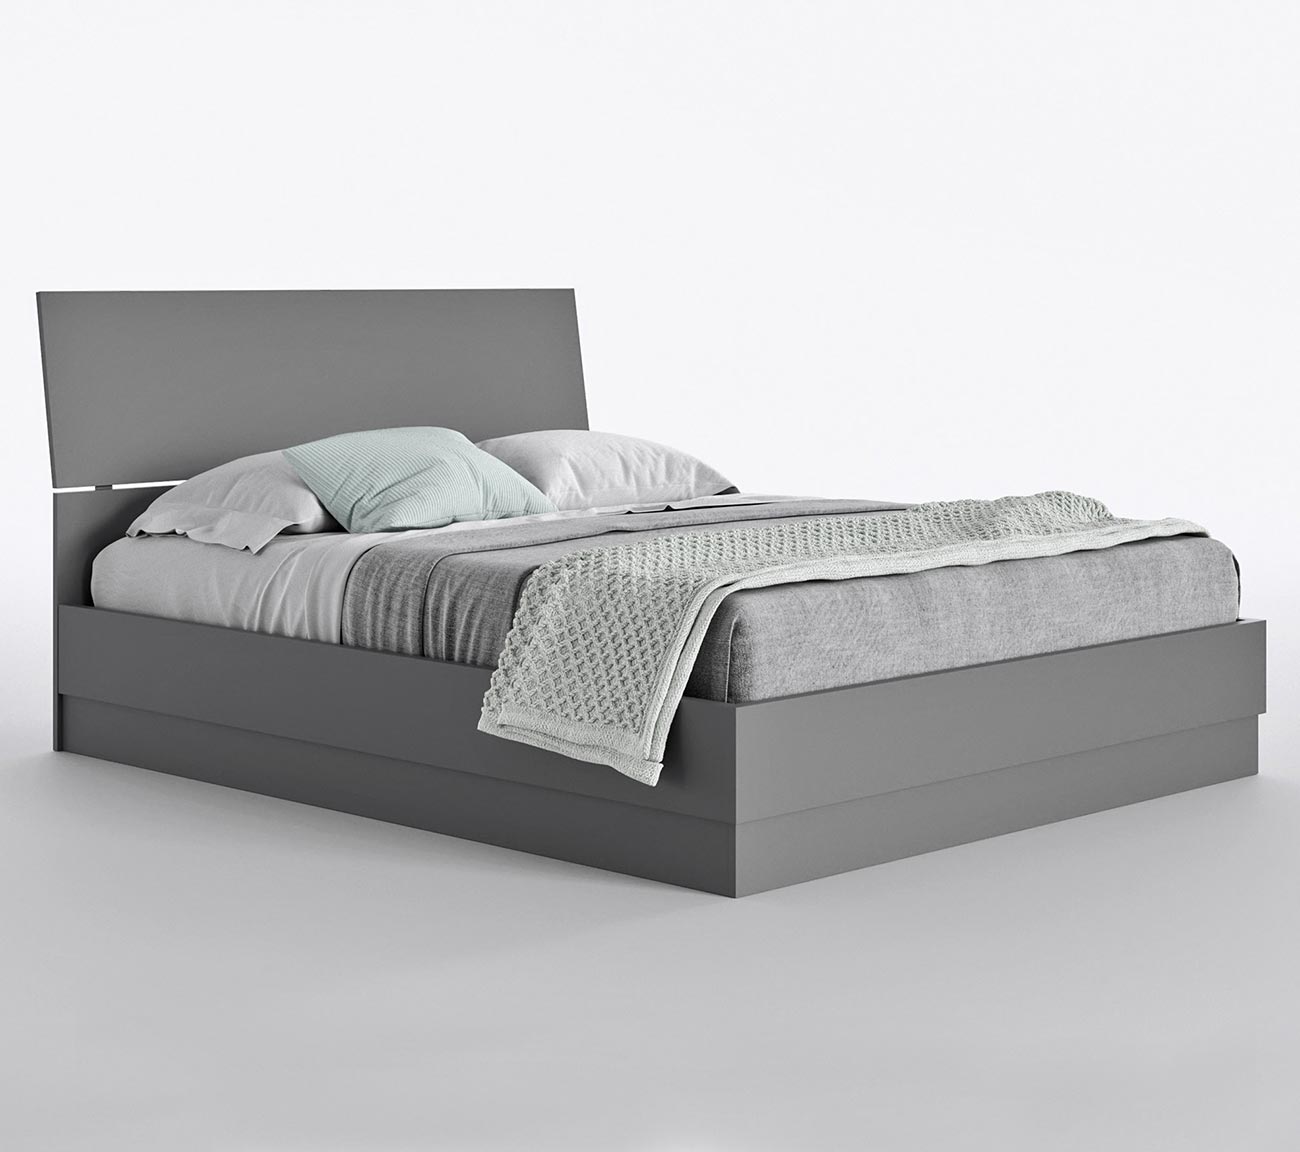 Minimalist double bed with without container